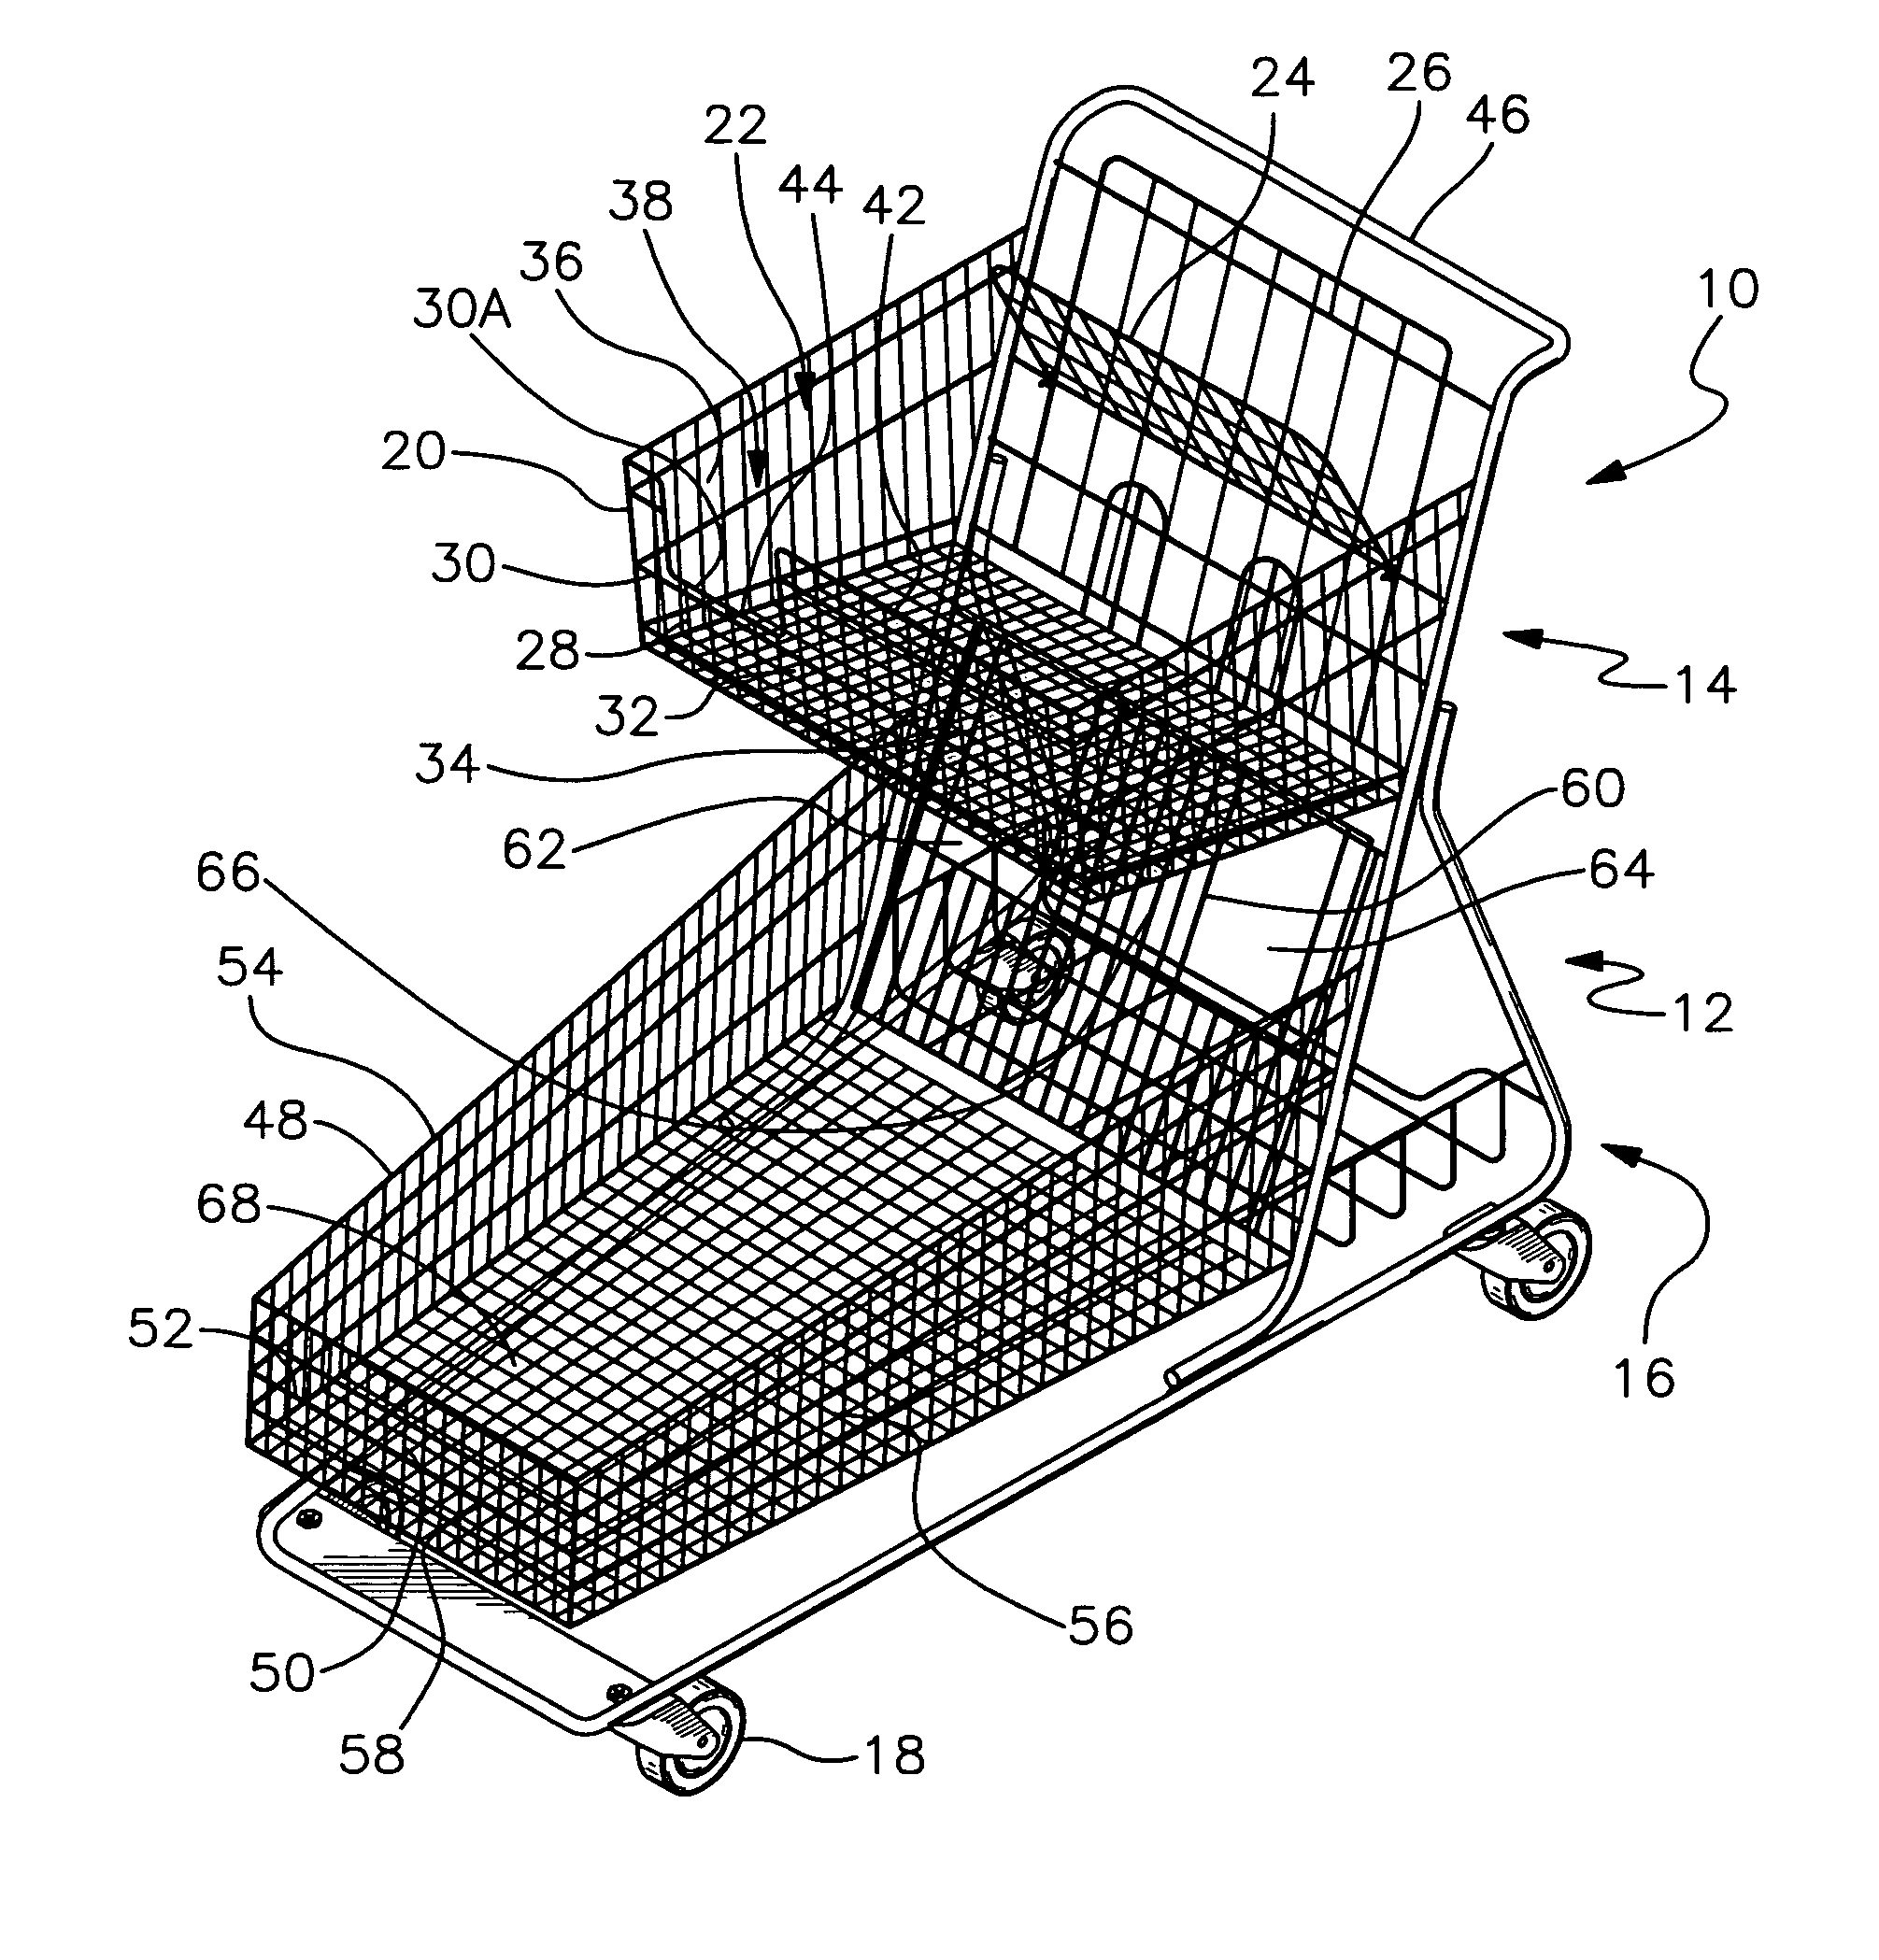 Shopping cart adapted to receive elongated items